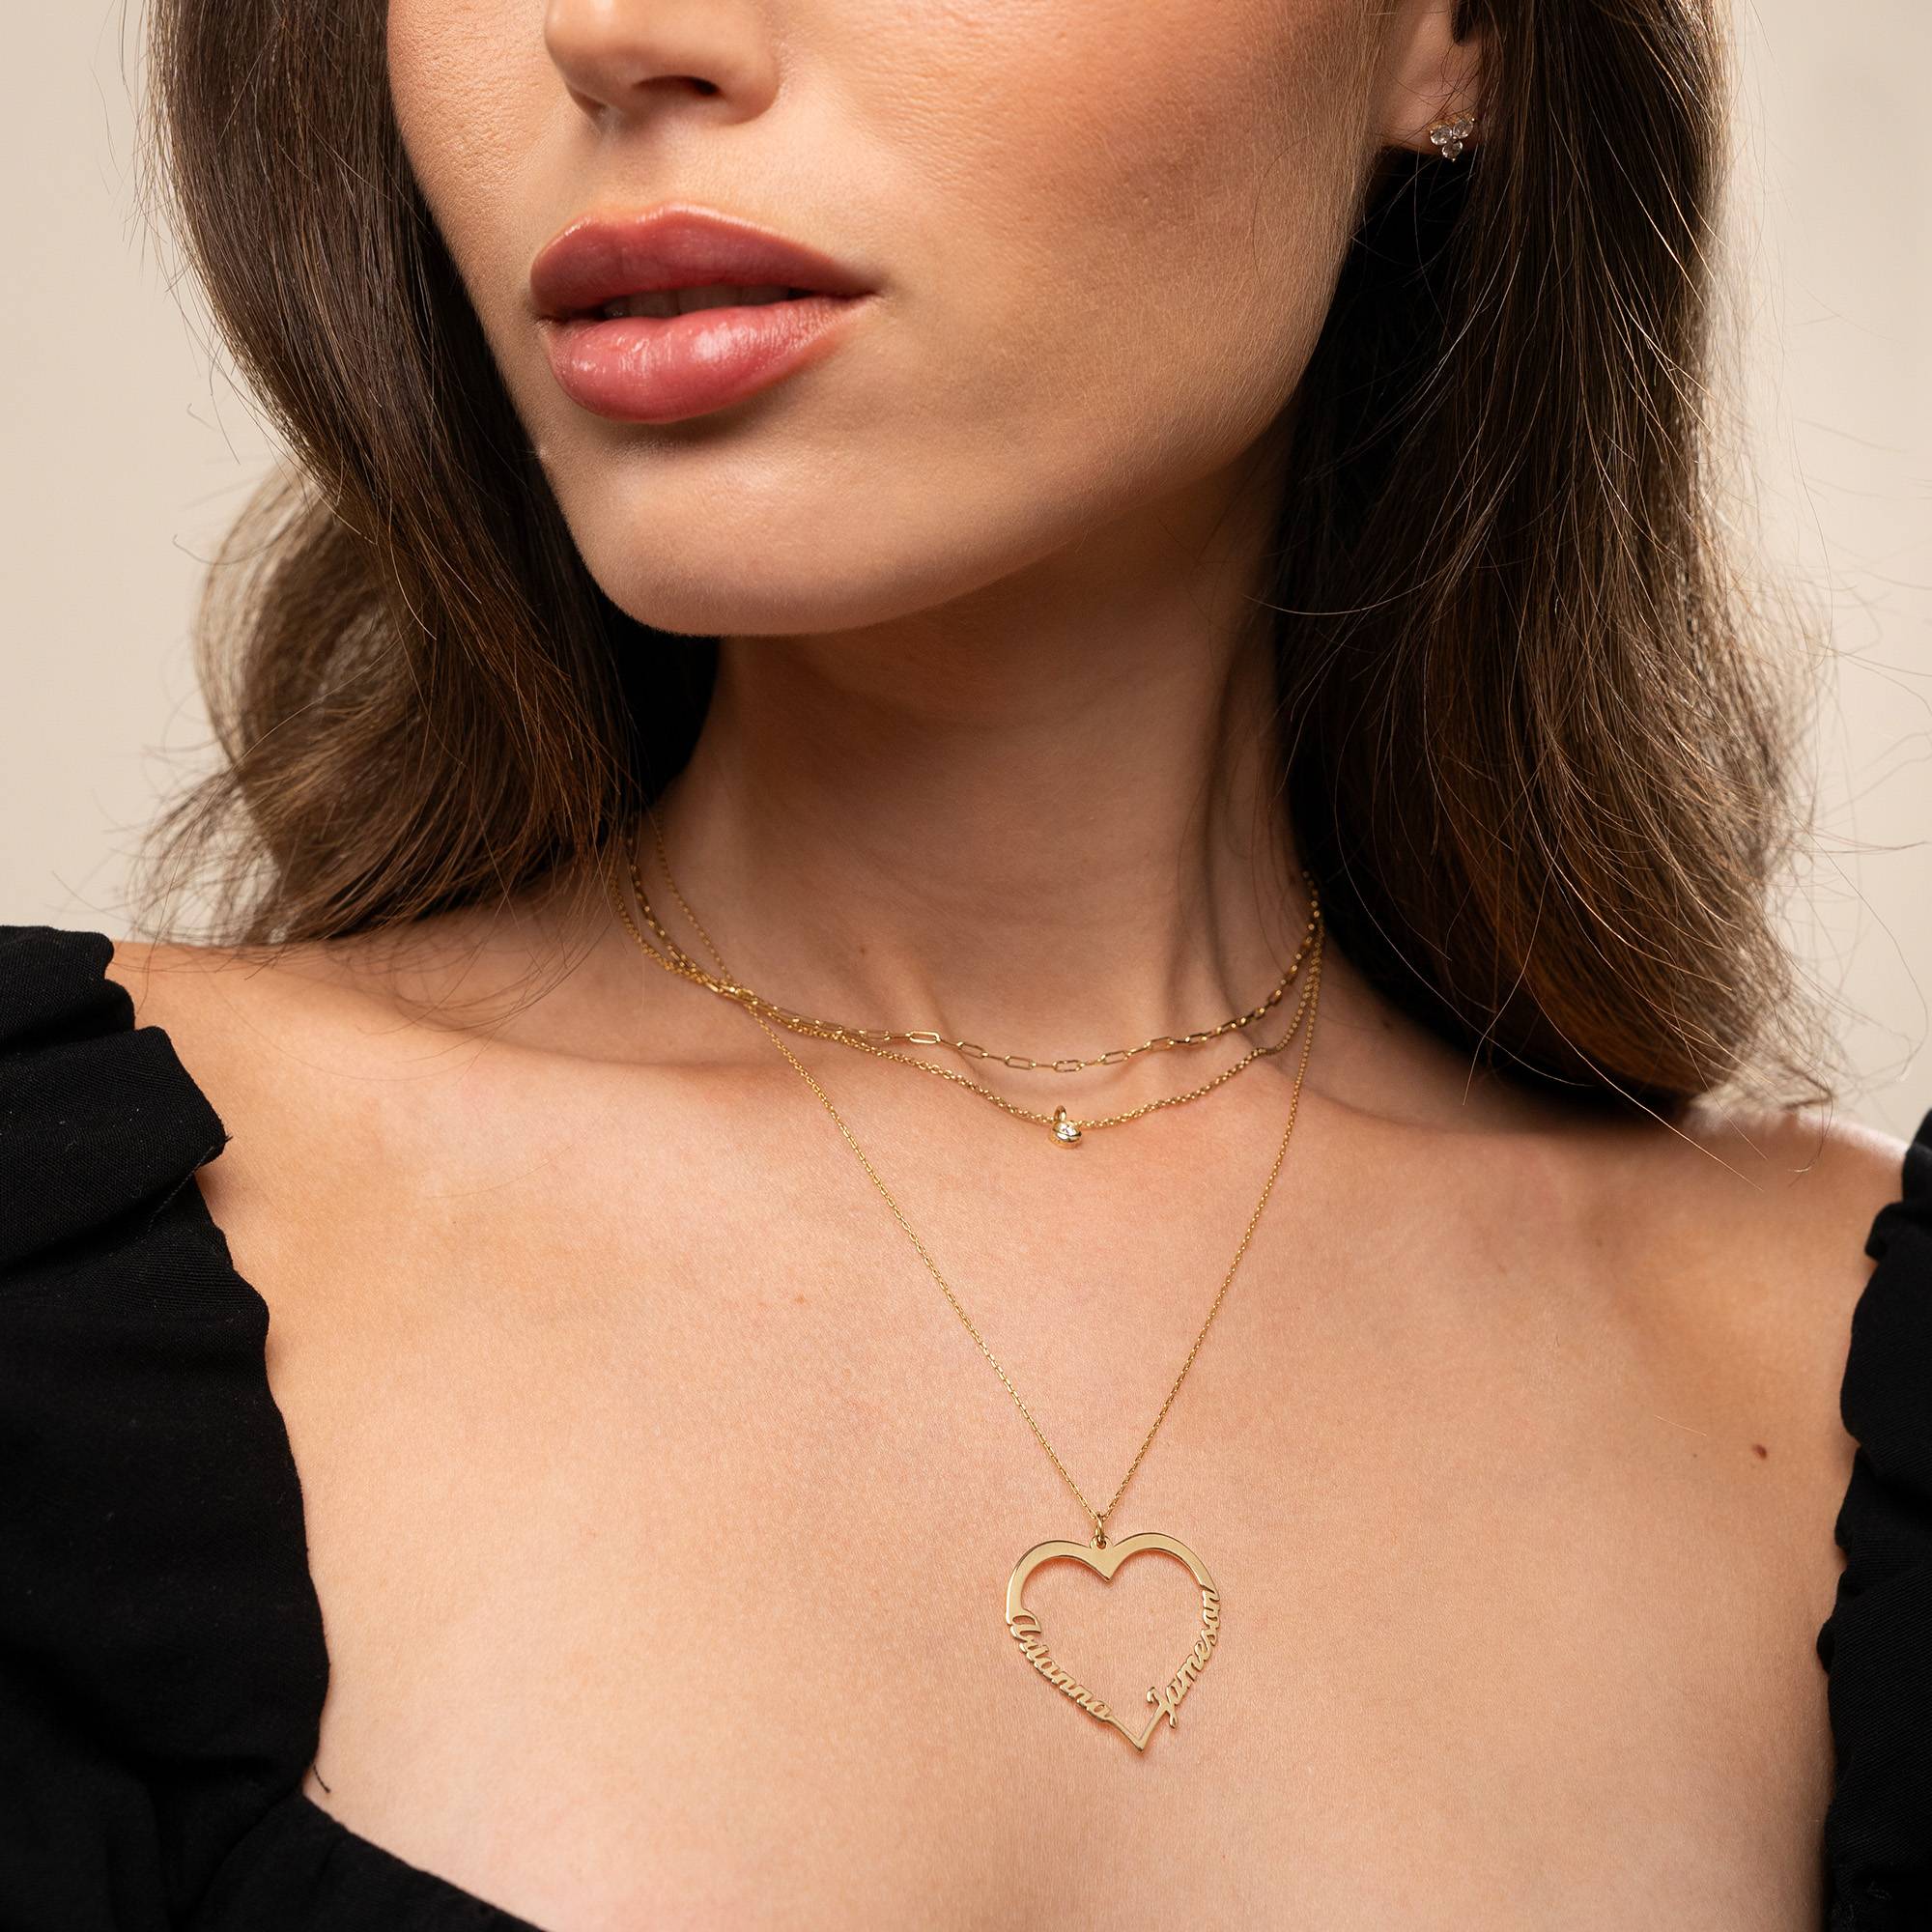 Contour Heart Pendant Necklace with Two Names in 10k Gold-4 product photo